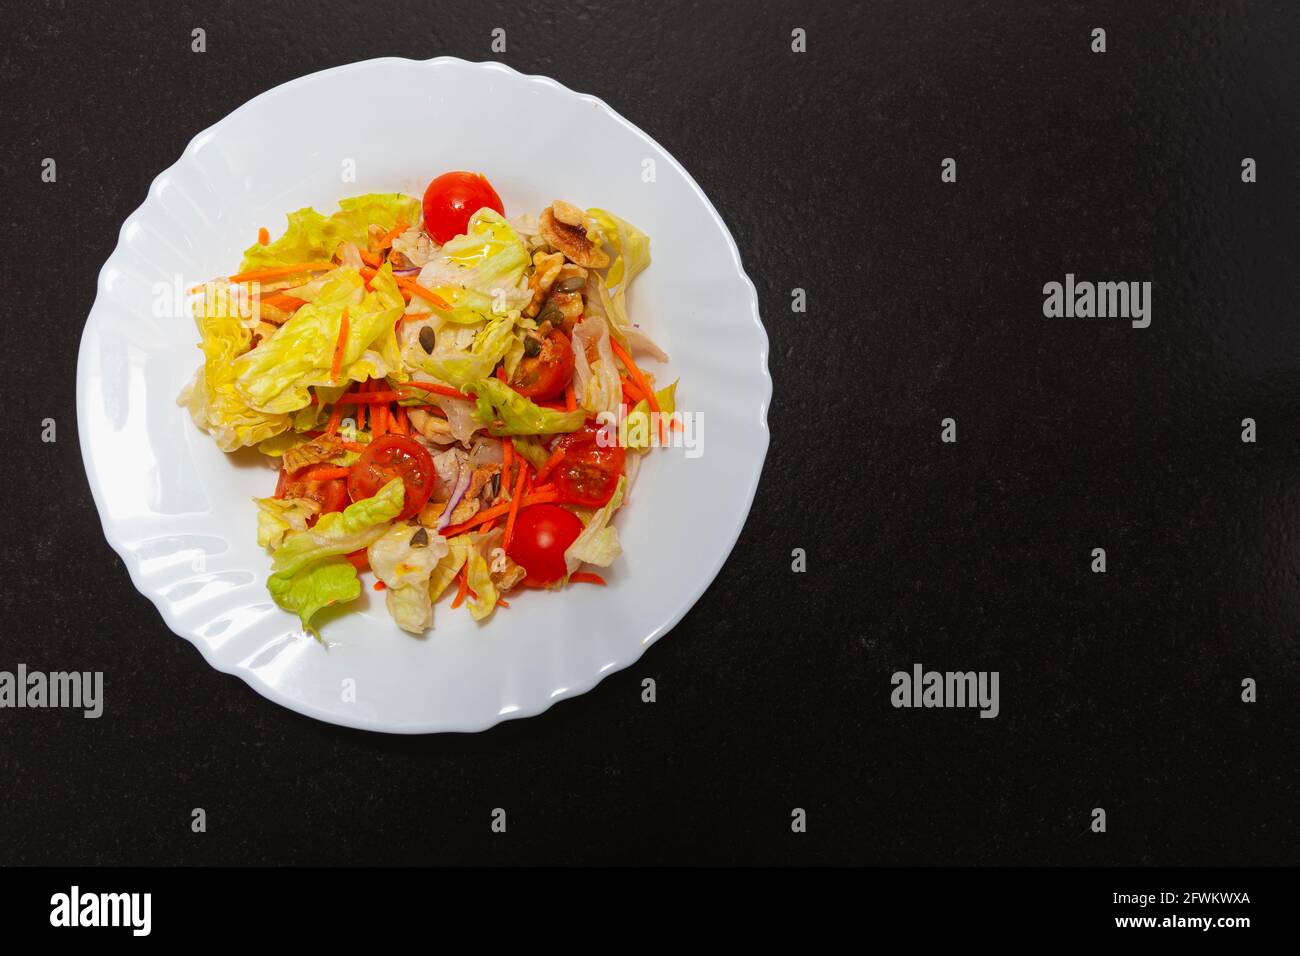 Combination of vegetables and greens in a ceramic plate on a dark bench in a kitchen. The recipe calls for lettuce, cherry tomato, carrot, walnuts, on Stock Photo